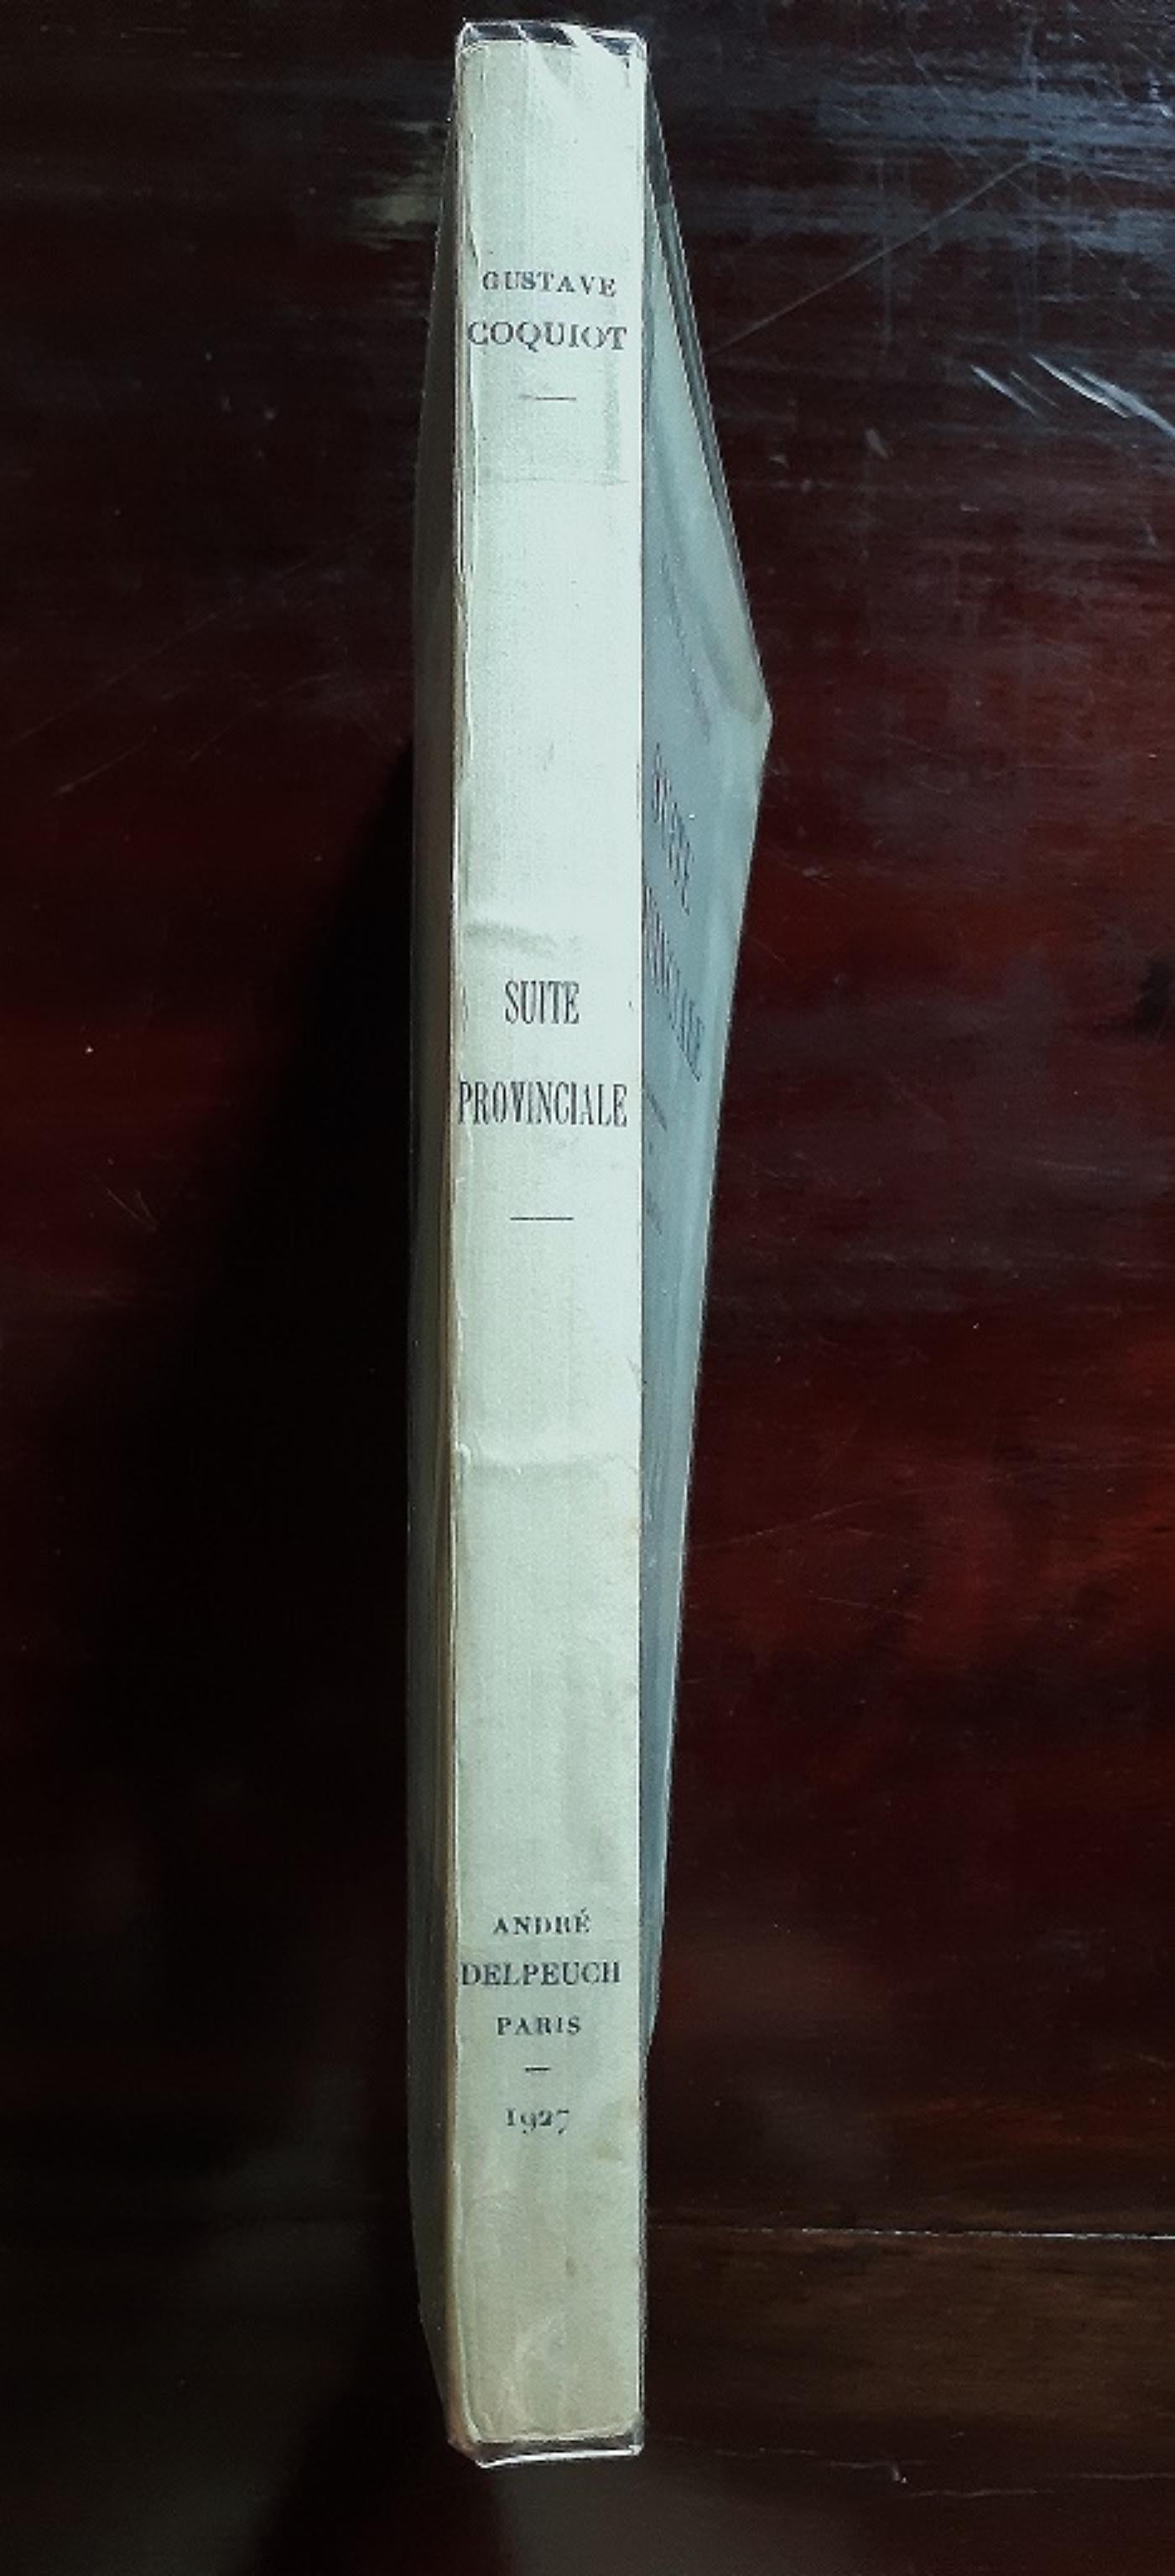 Suite Provinciale is an original Modern Rare book ritten by Gustave Coquiot (24 September 1865 – 6 June 1926)  and illustrated by Marc Chagall (Lëzna, 1887 – Saint-Paul-de-Vence, 1985) in 1927.

Original First Edition.

Published by André Delpeuch,